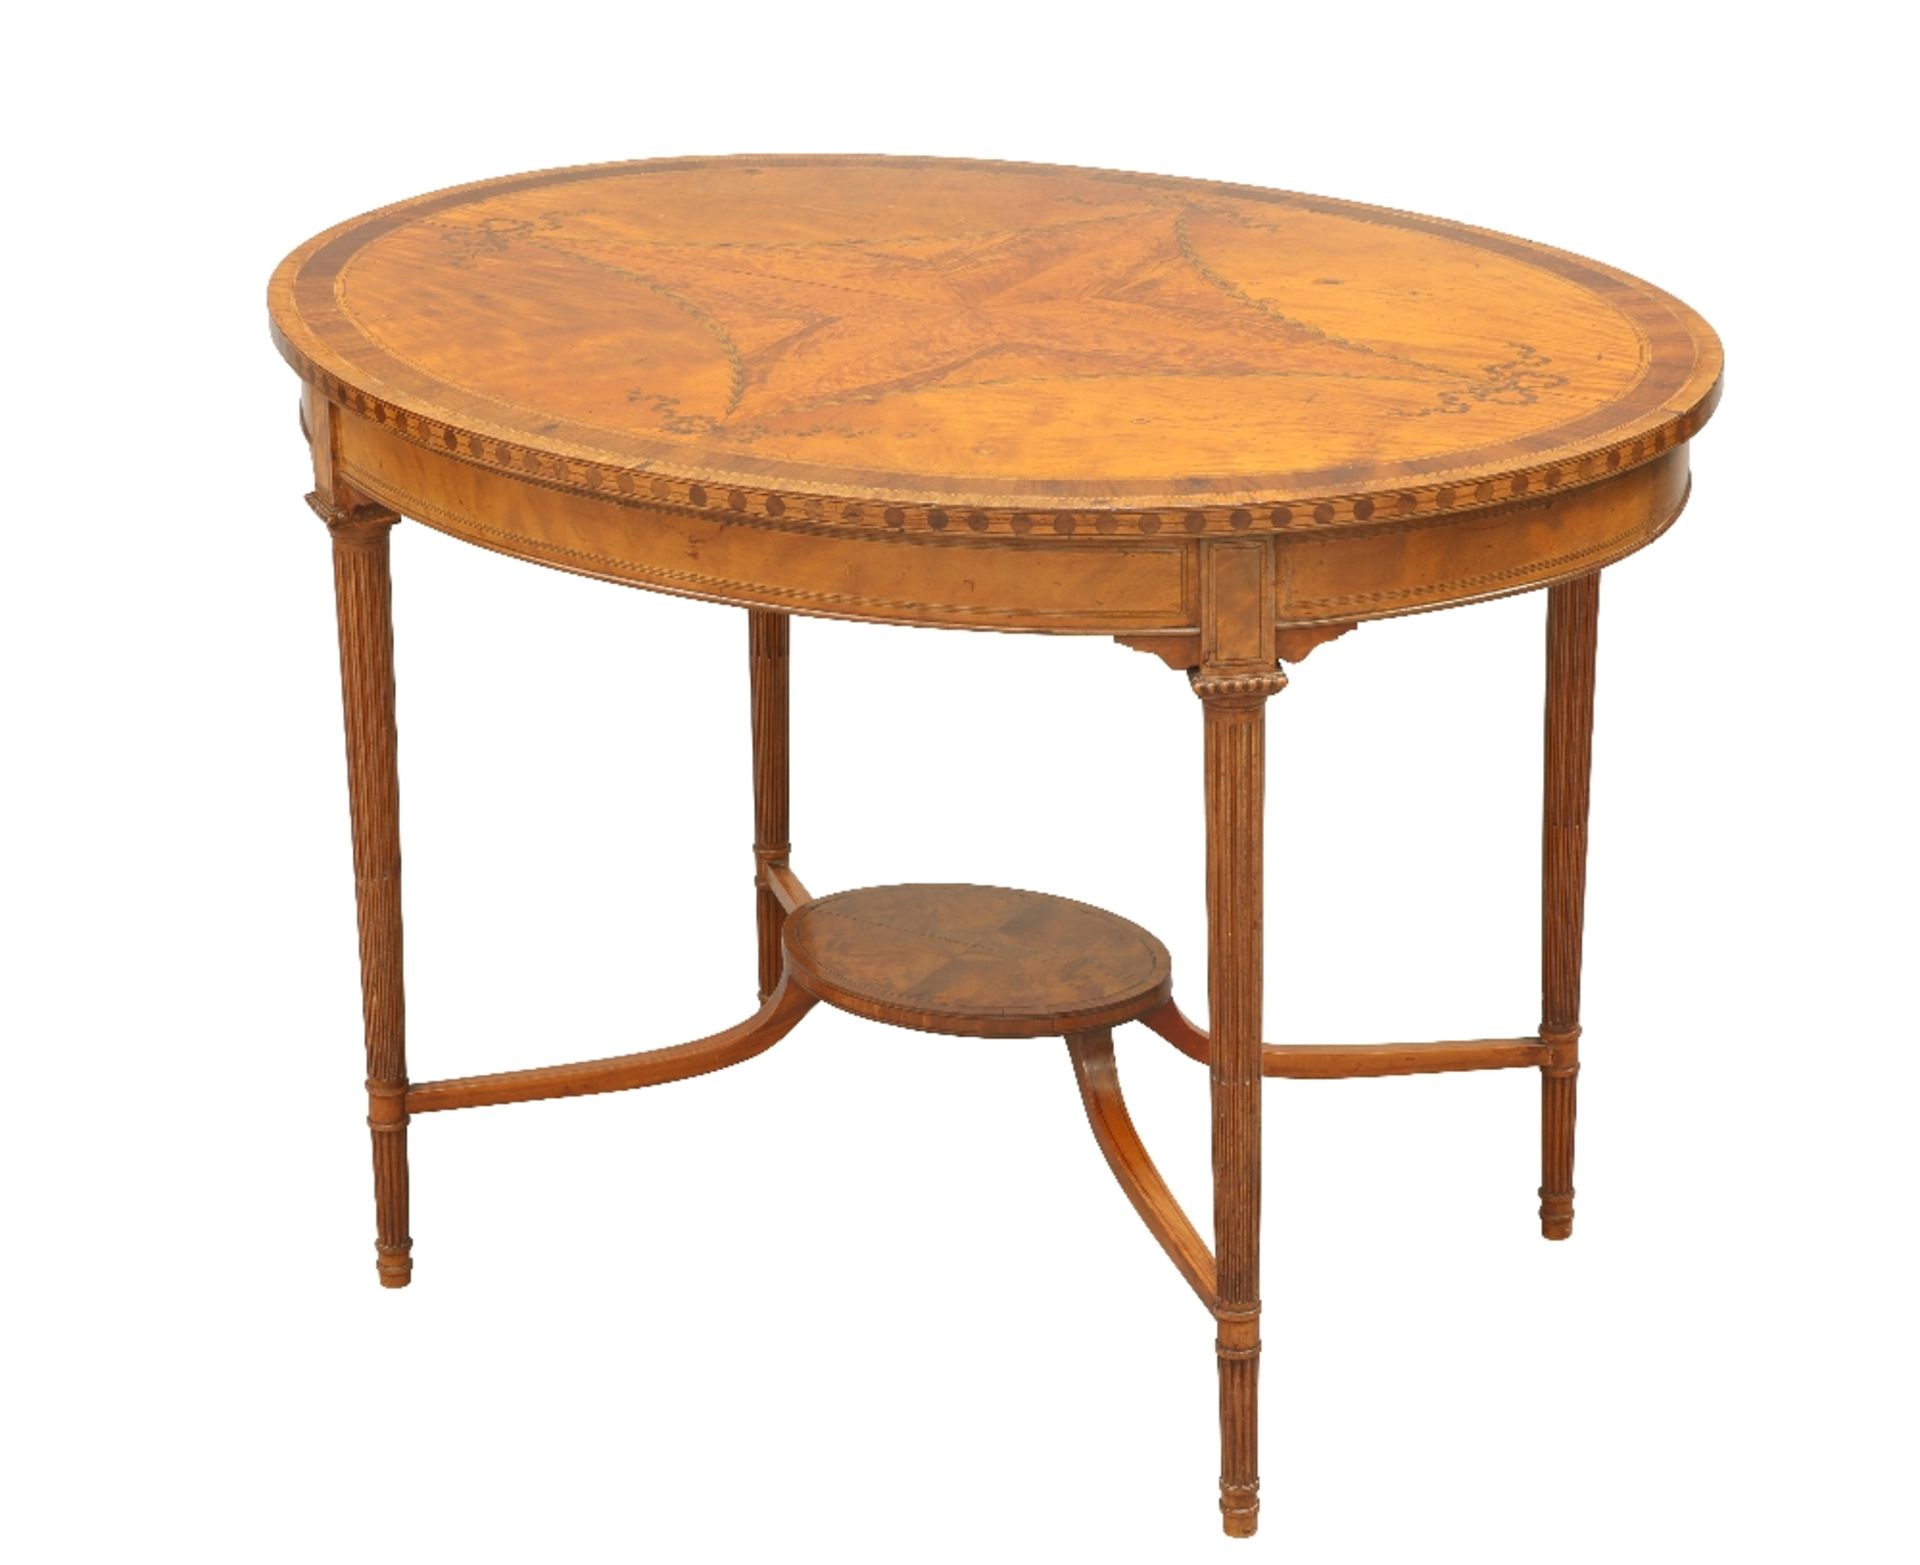 AN INLAID SATINWOOD CENTRE TABLE